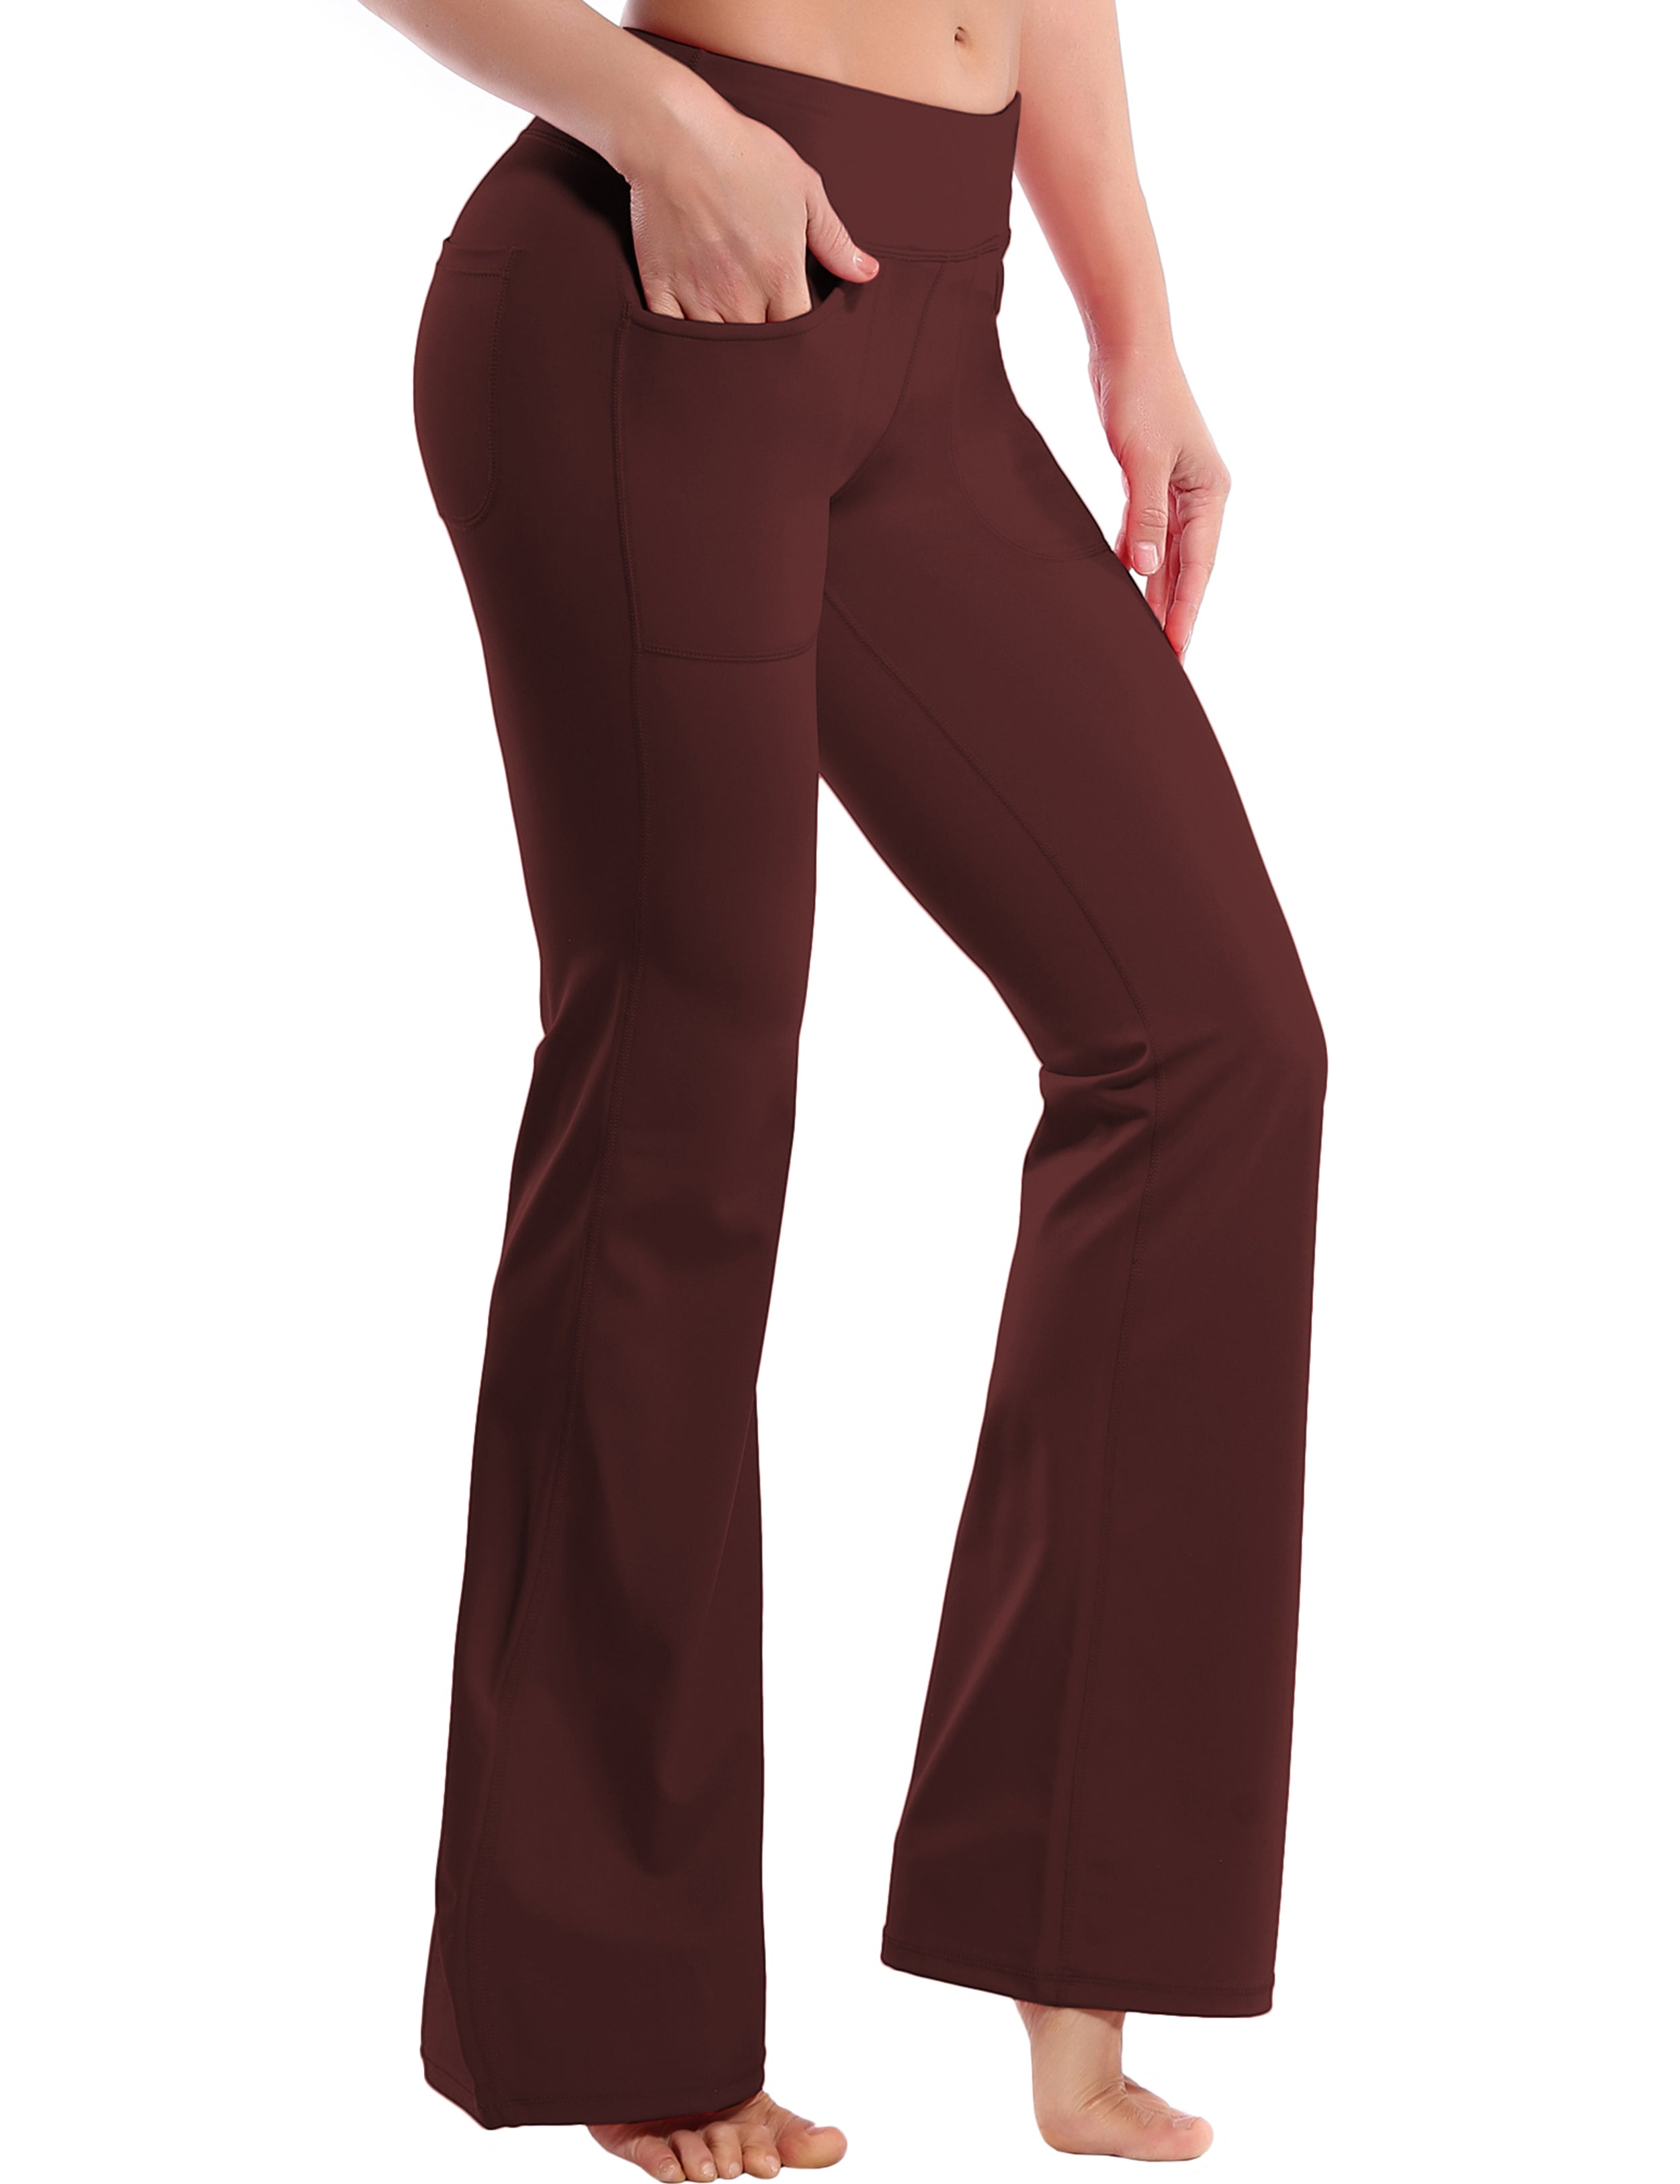 4 Pockets Bootcut Leggings mahoganymaroon 75%Nylon/25%Spandex Fabric doesn't attract lint easily 4-way stretch No see-through Moisture-wicking Inner pocket Four lengths